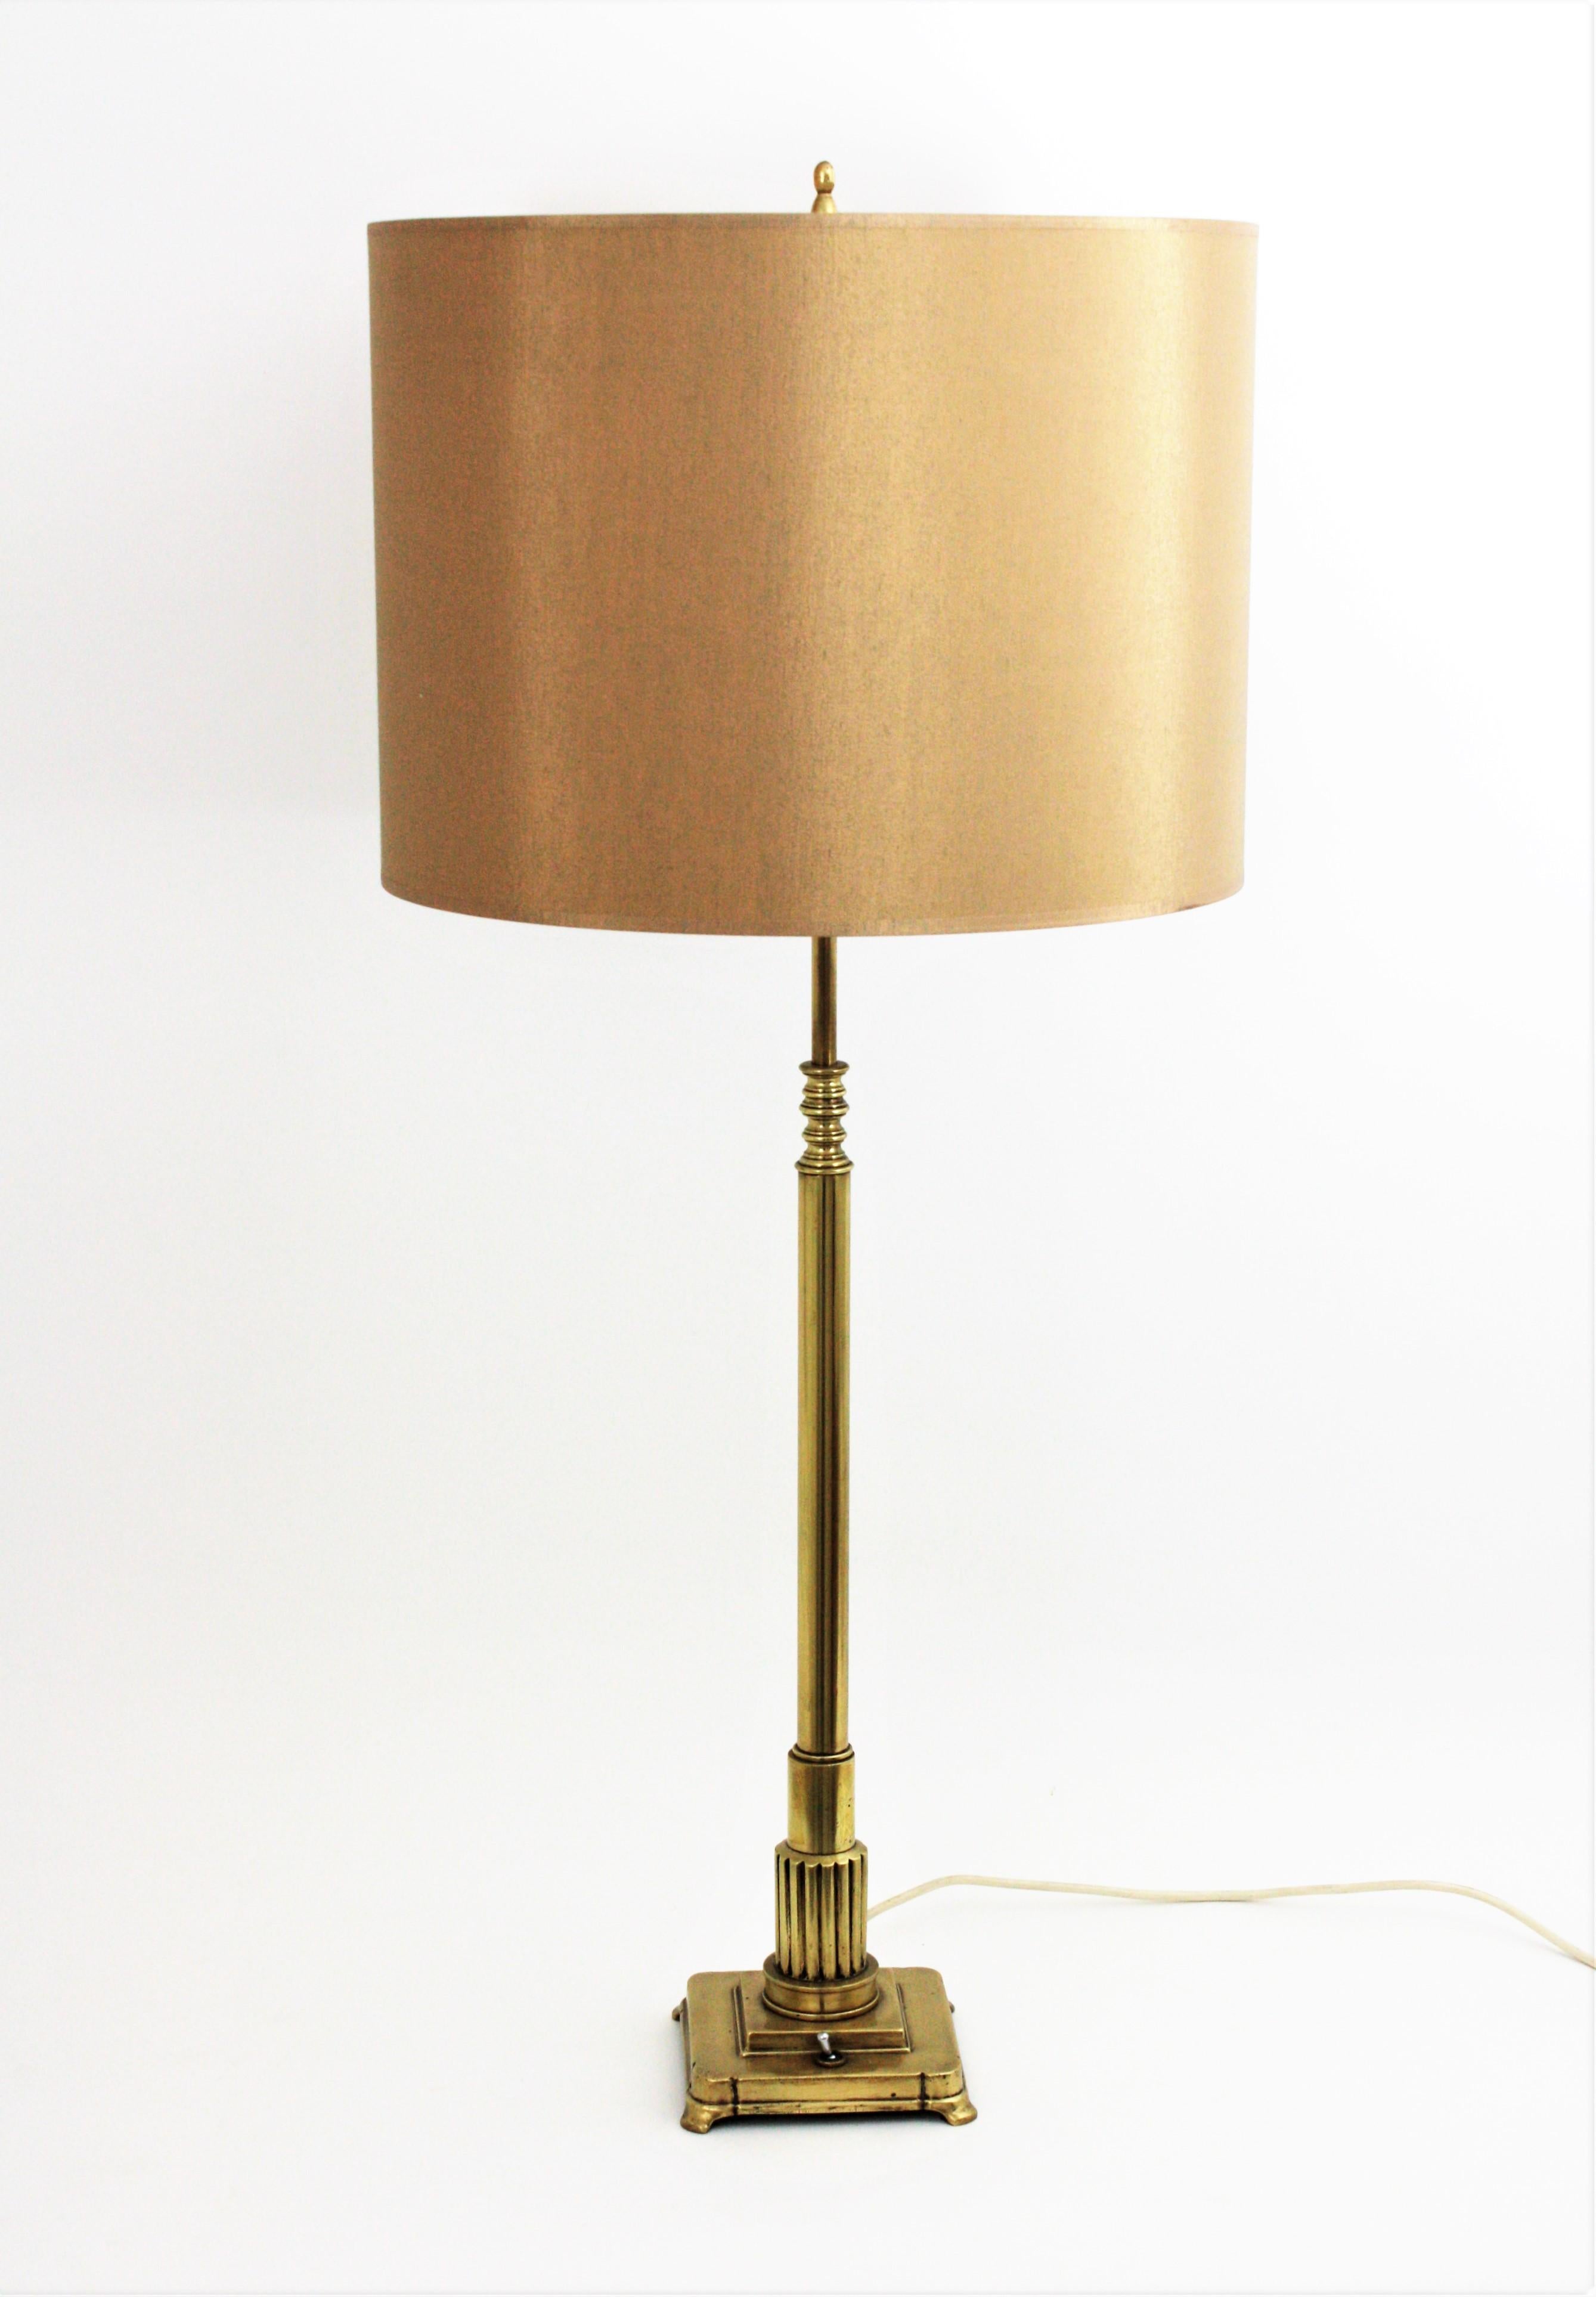 French Art Deco Column Table Lamp in Polished Brass For Sale 3